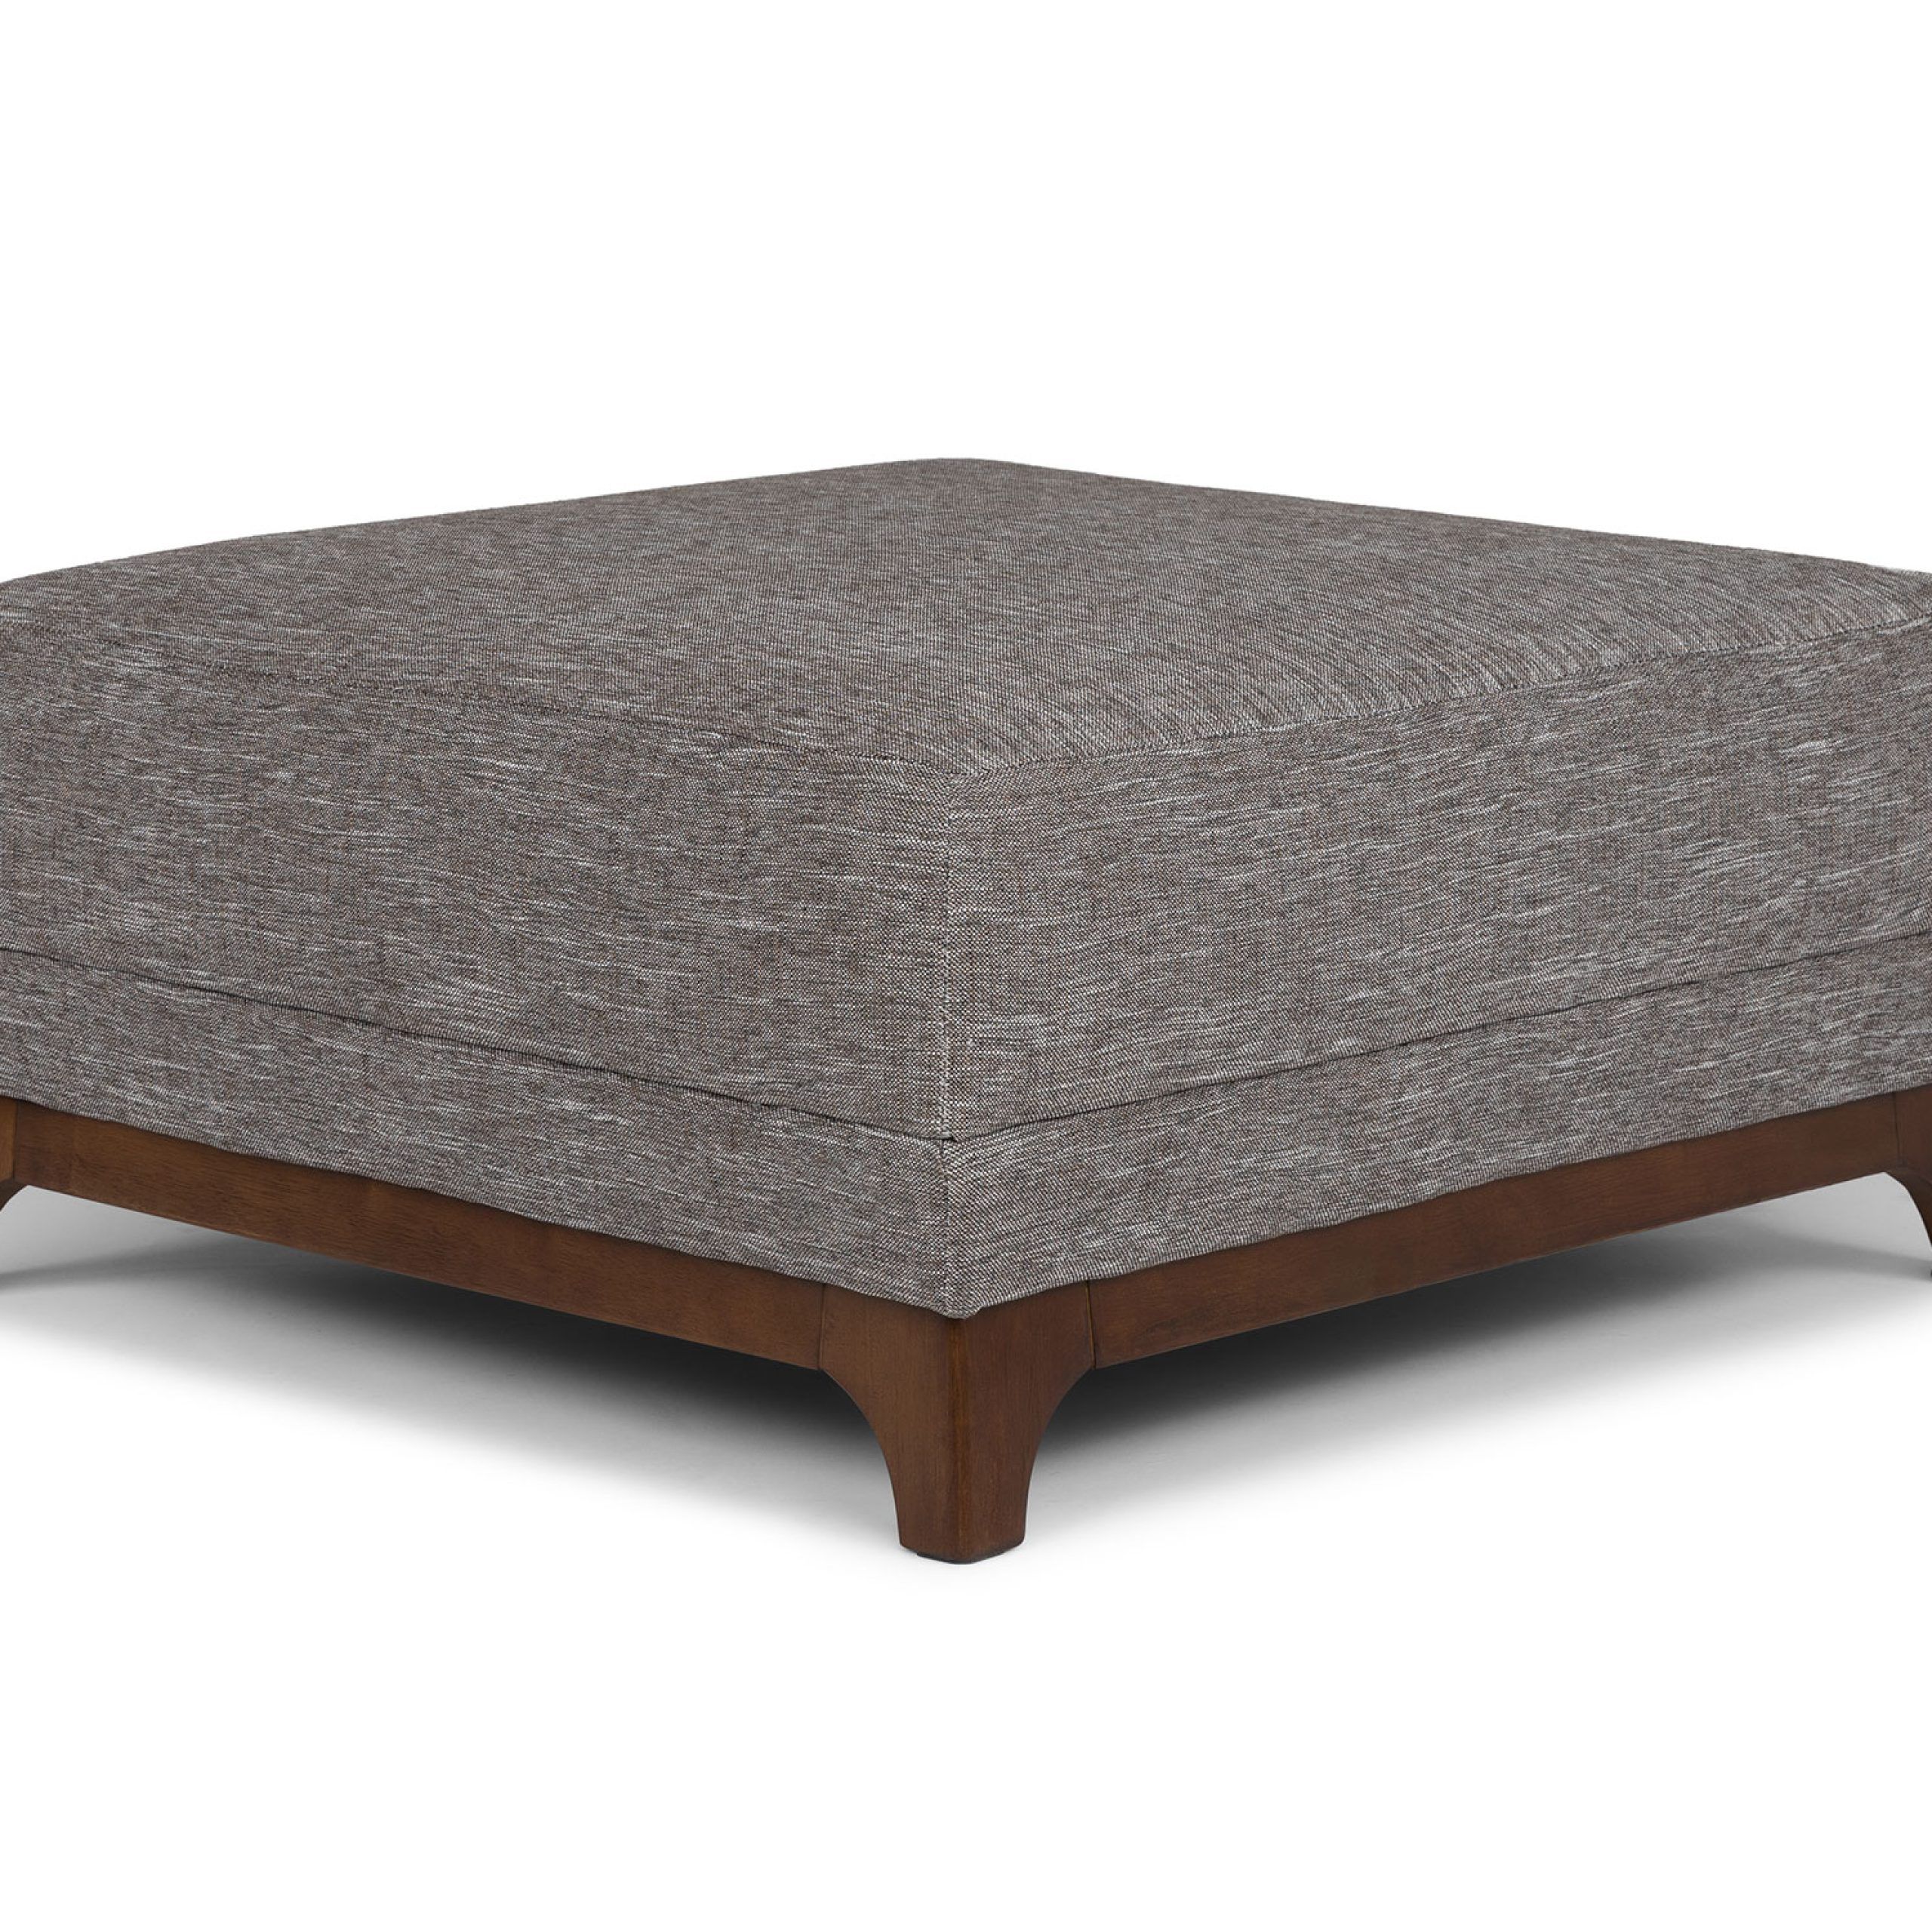 Ceni Walnut & Volcanic Gray Fabric Ottoman | Article Pertaining To Gray Ottomans (View 8 of 15)